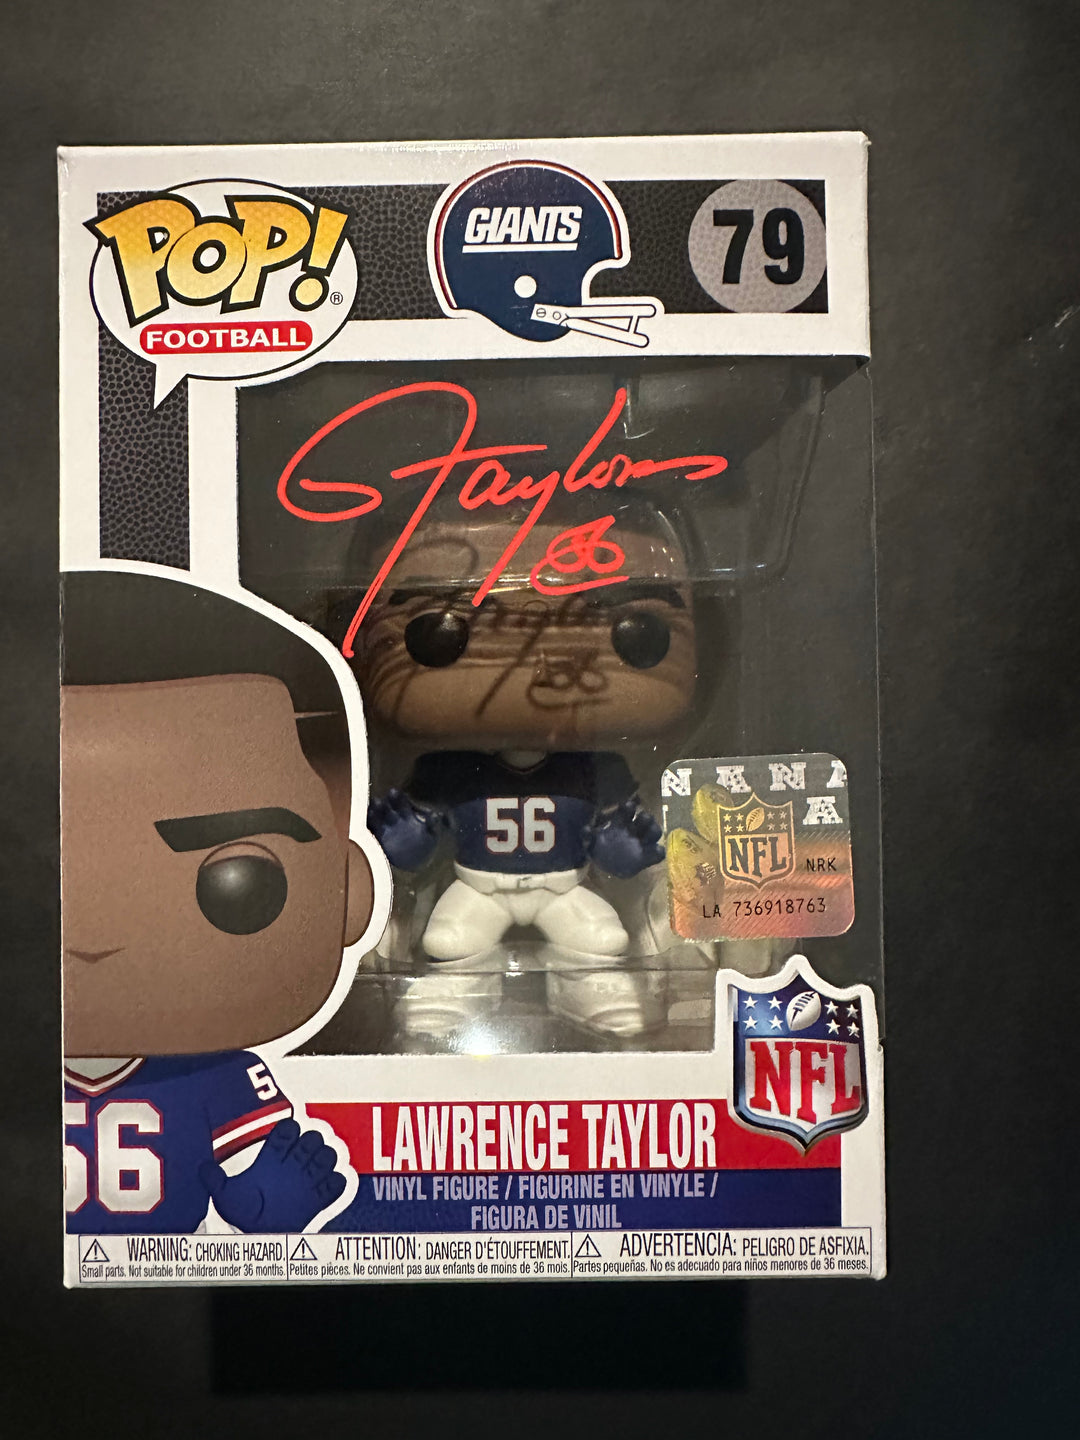 Lawrence Taylor signed funko